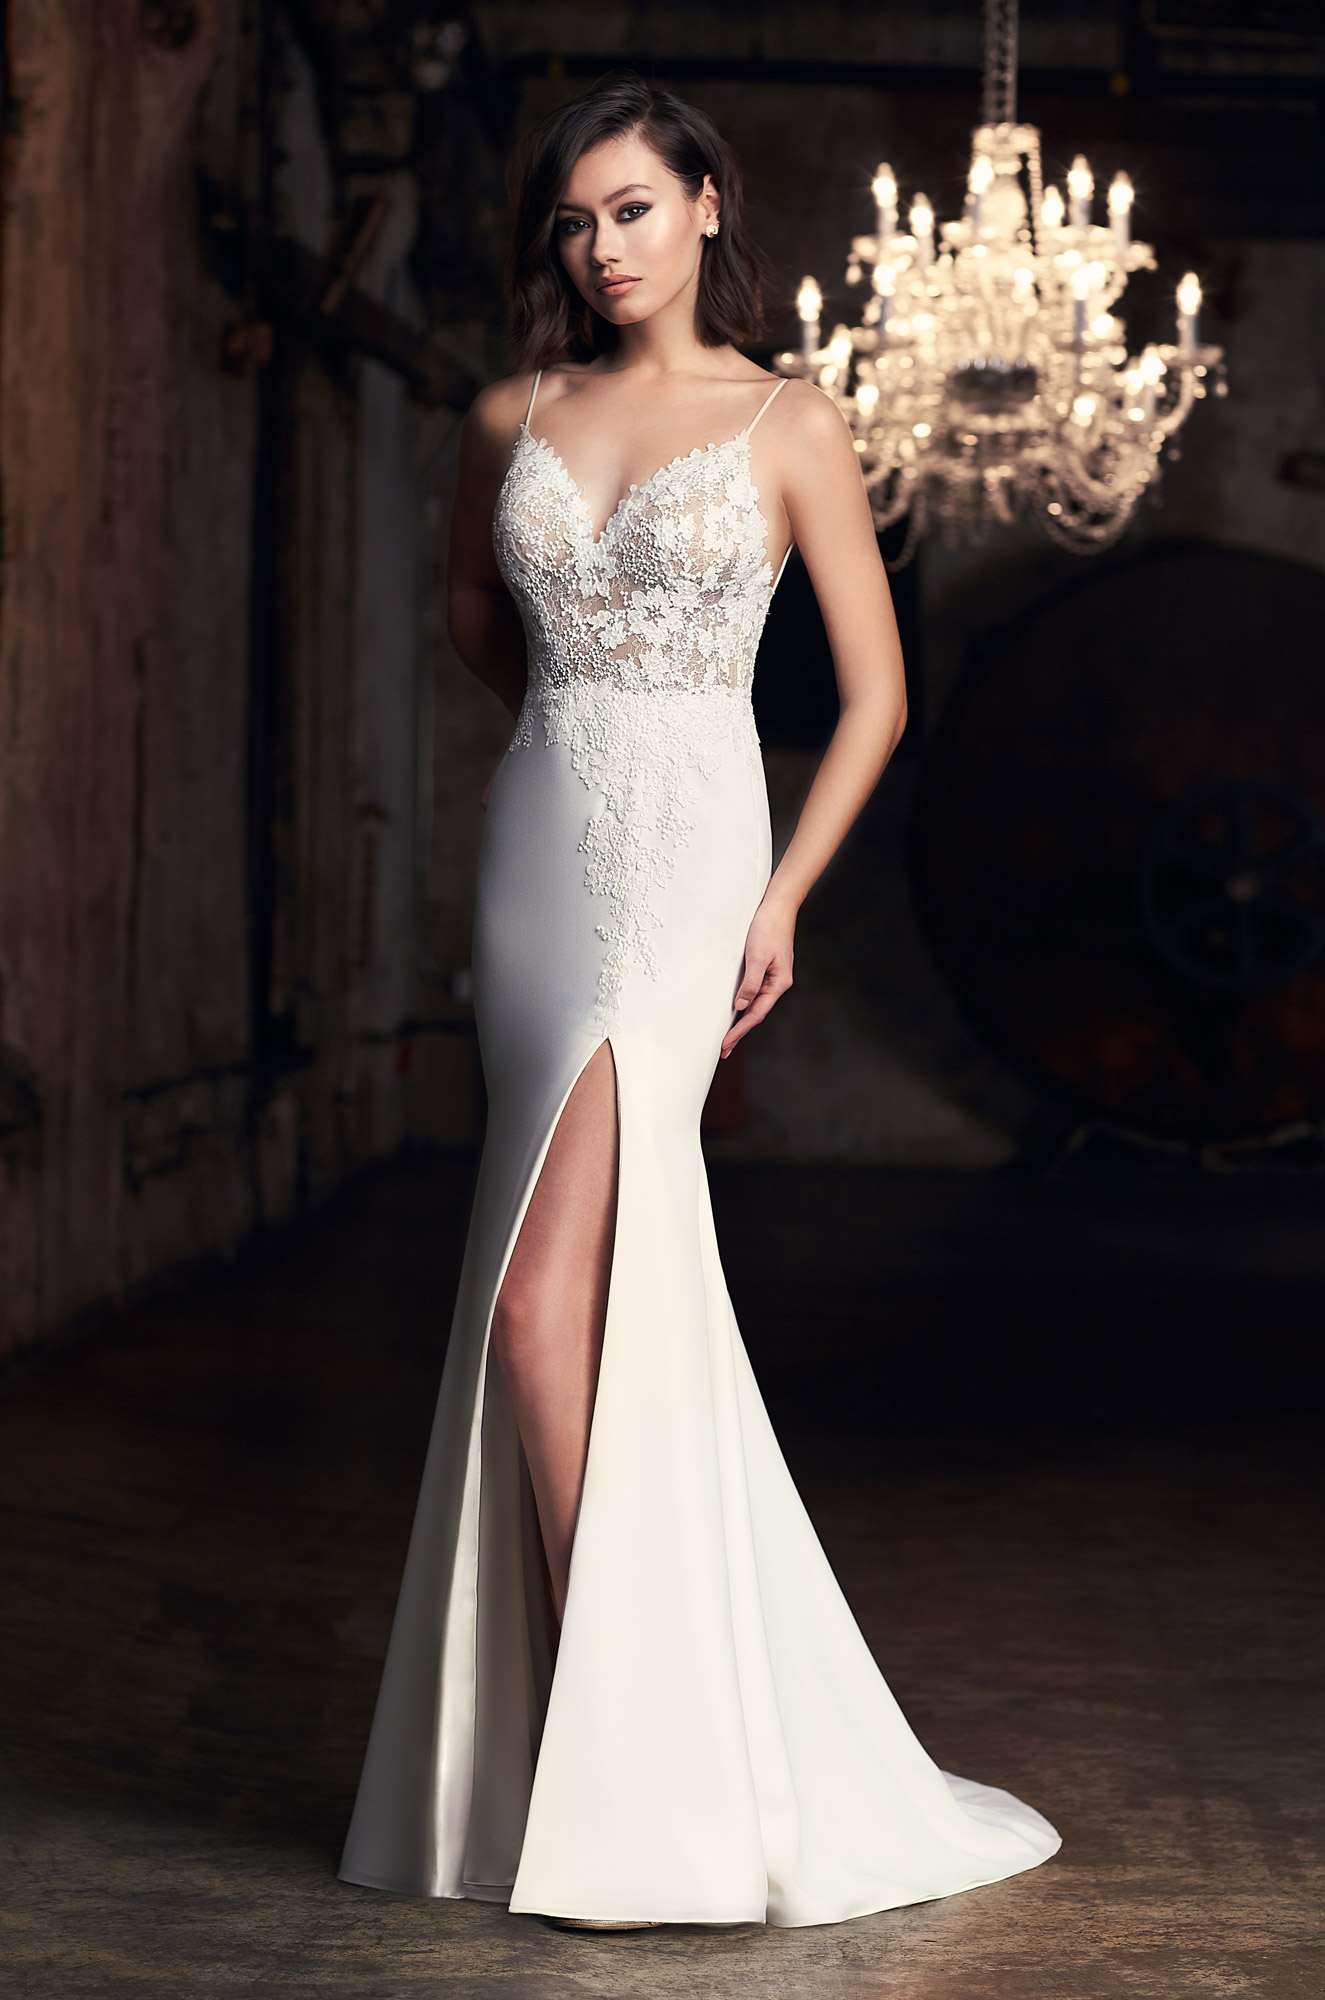 Great Slit Wedding Dress  Check it out now 